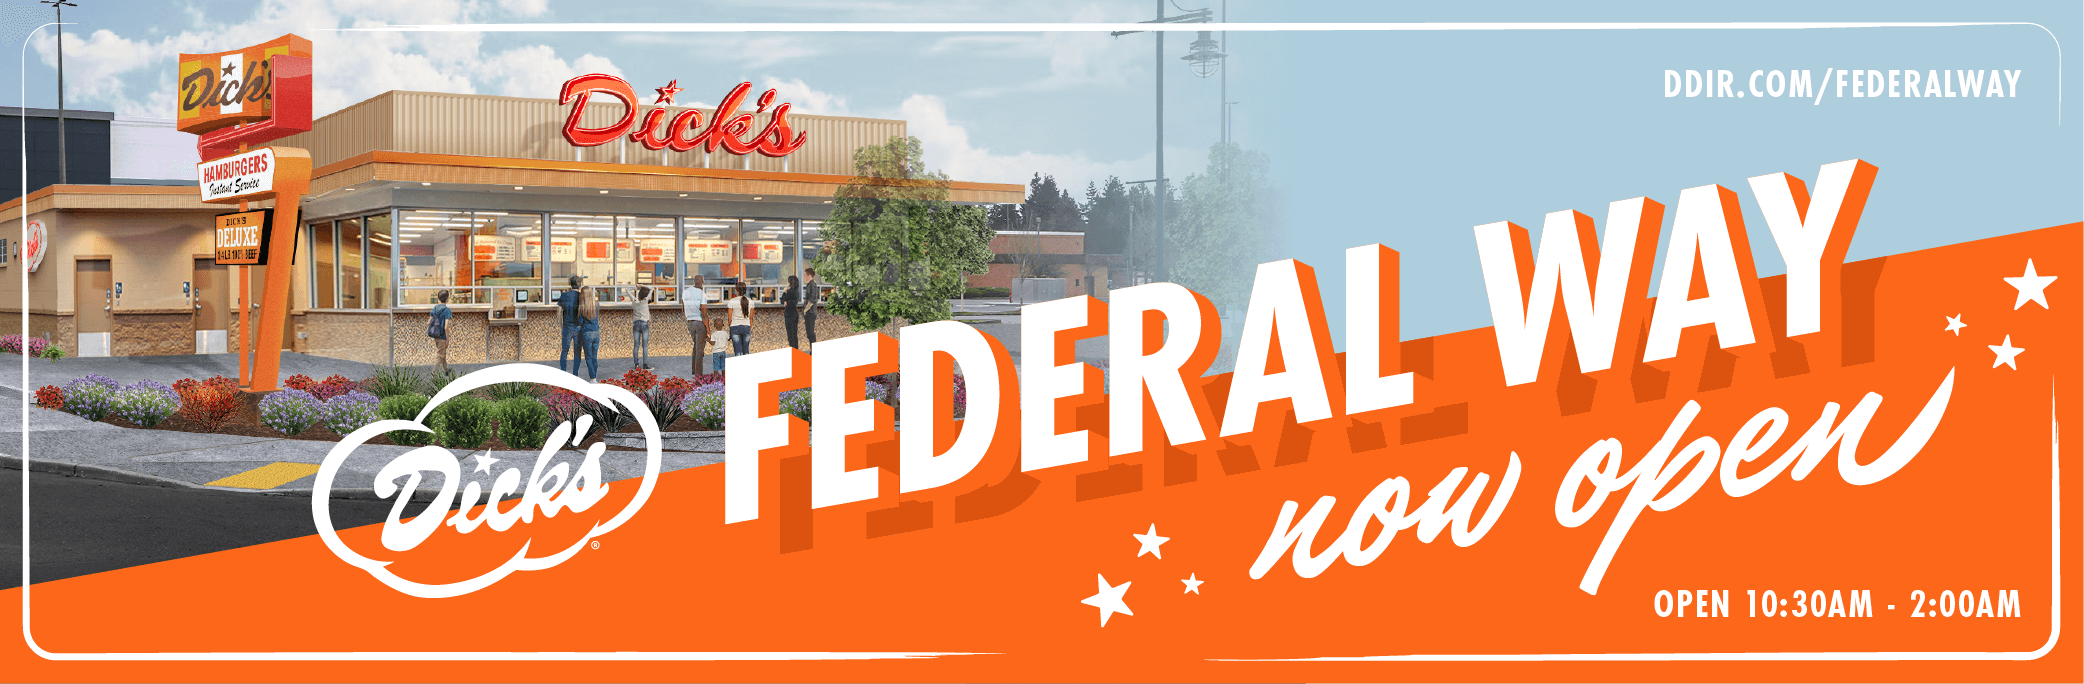 Our Federal Way location is now open!